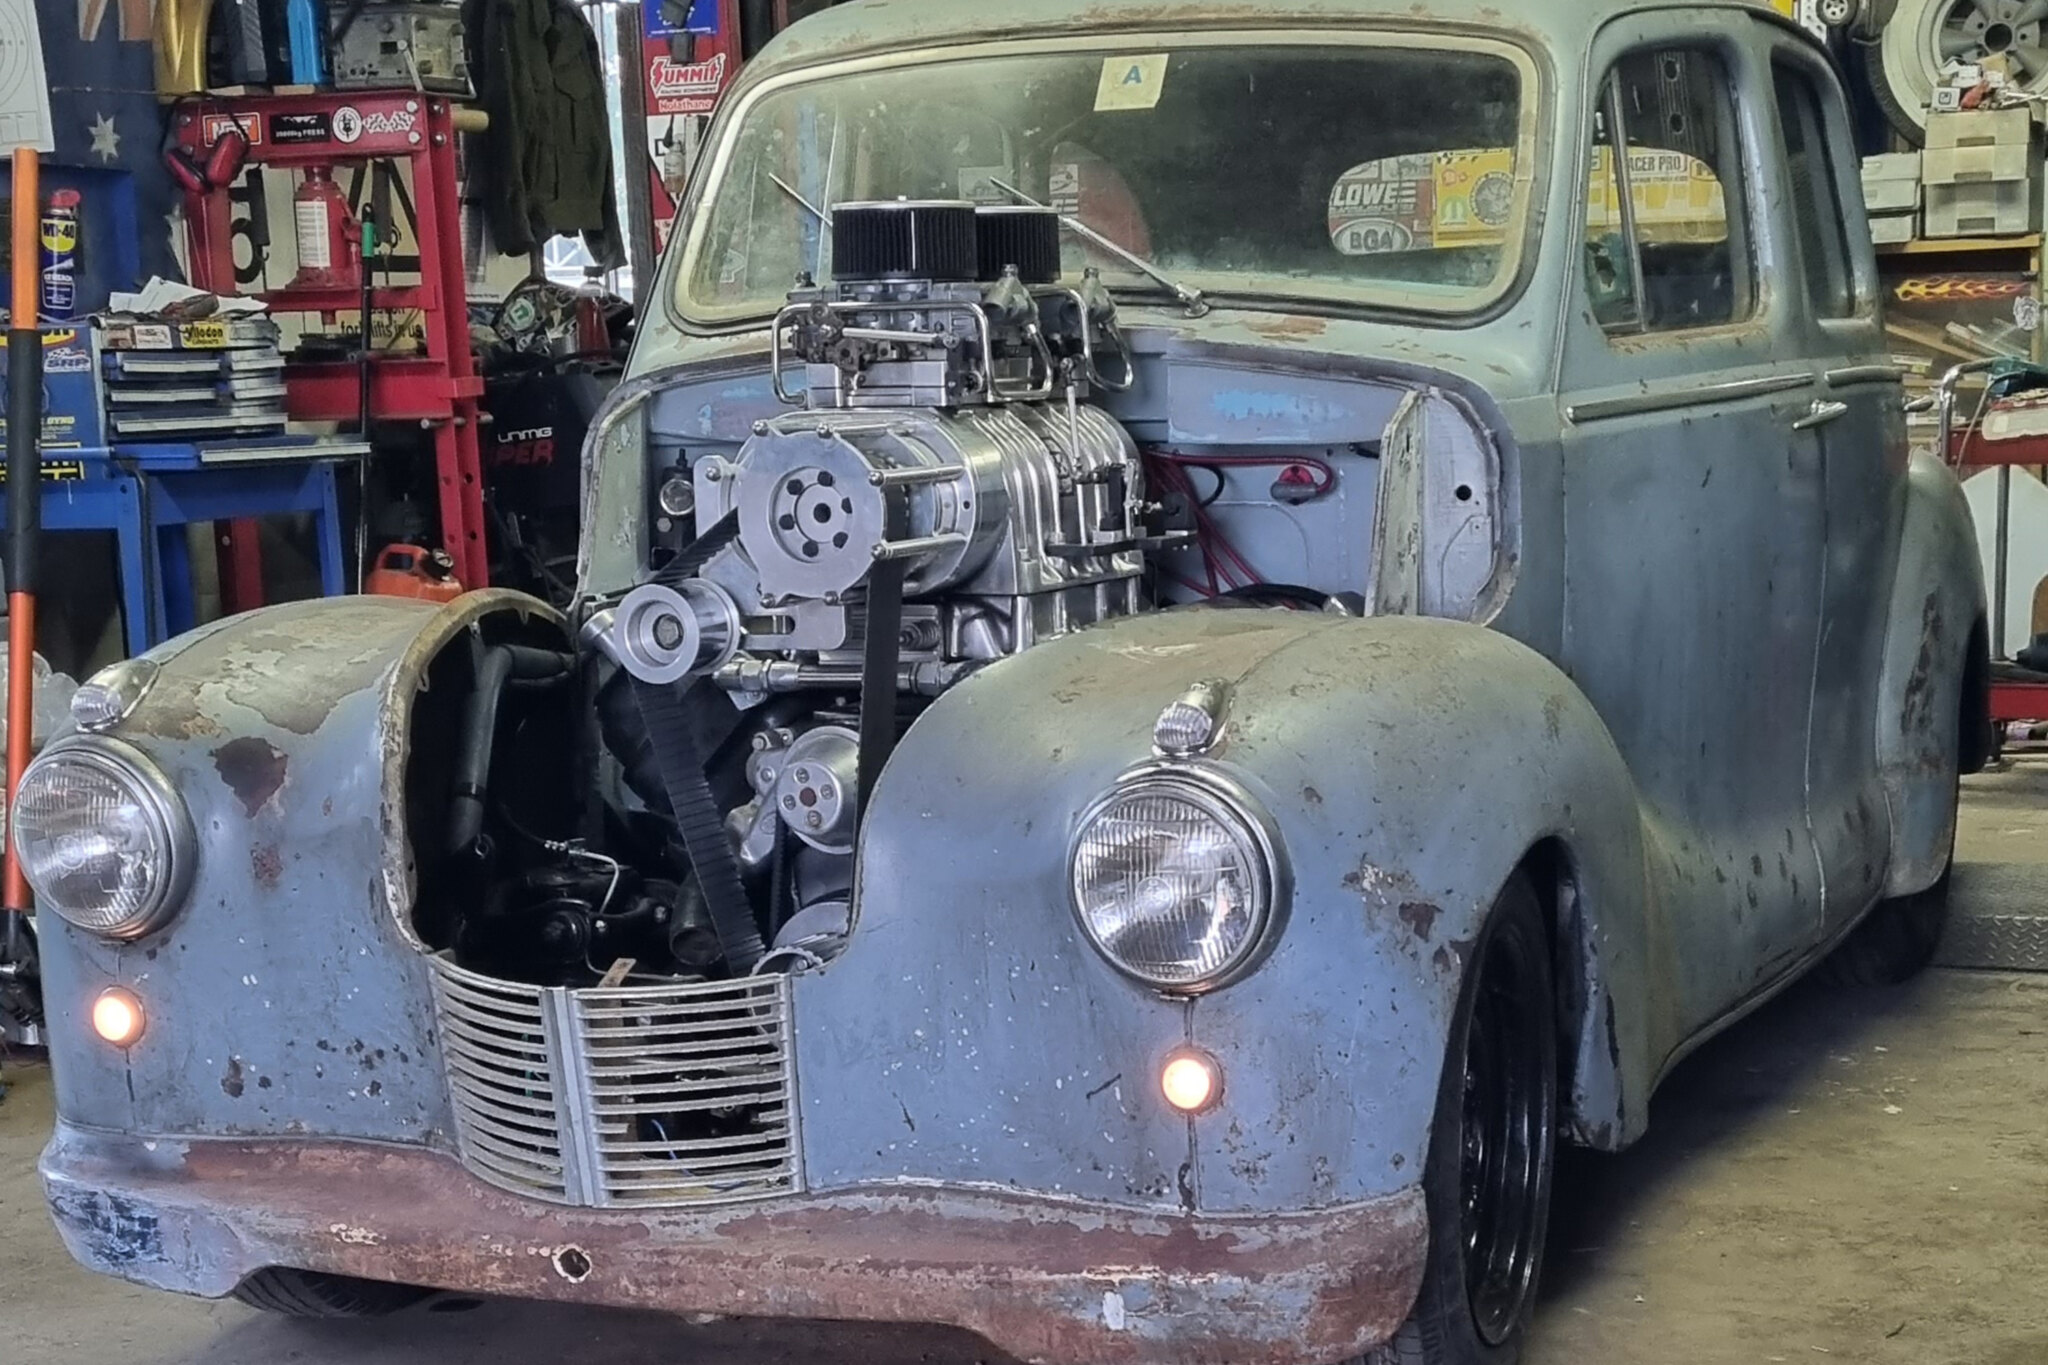 In the build: Blown Hemi-swapped Austin A40, Rides By Kam-built HG, V8-powered AP6 Val wagon + more